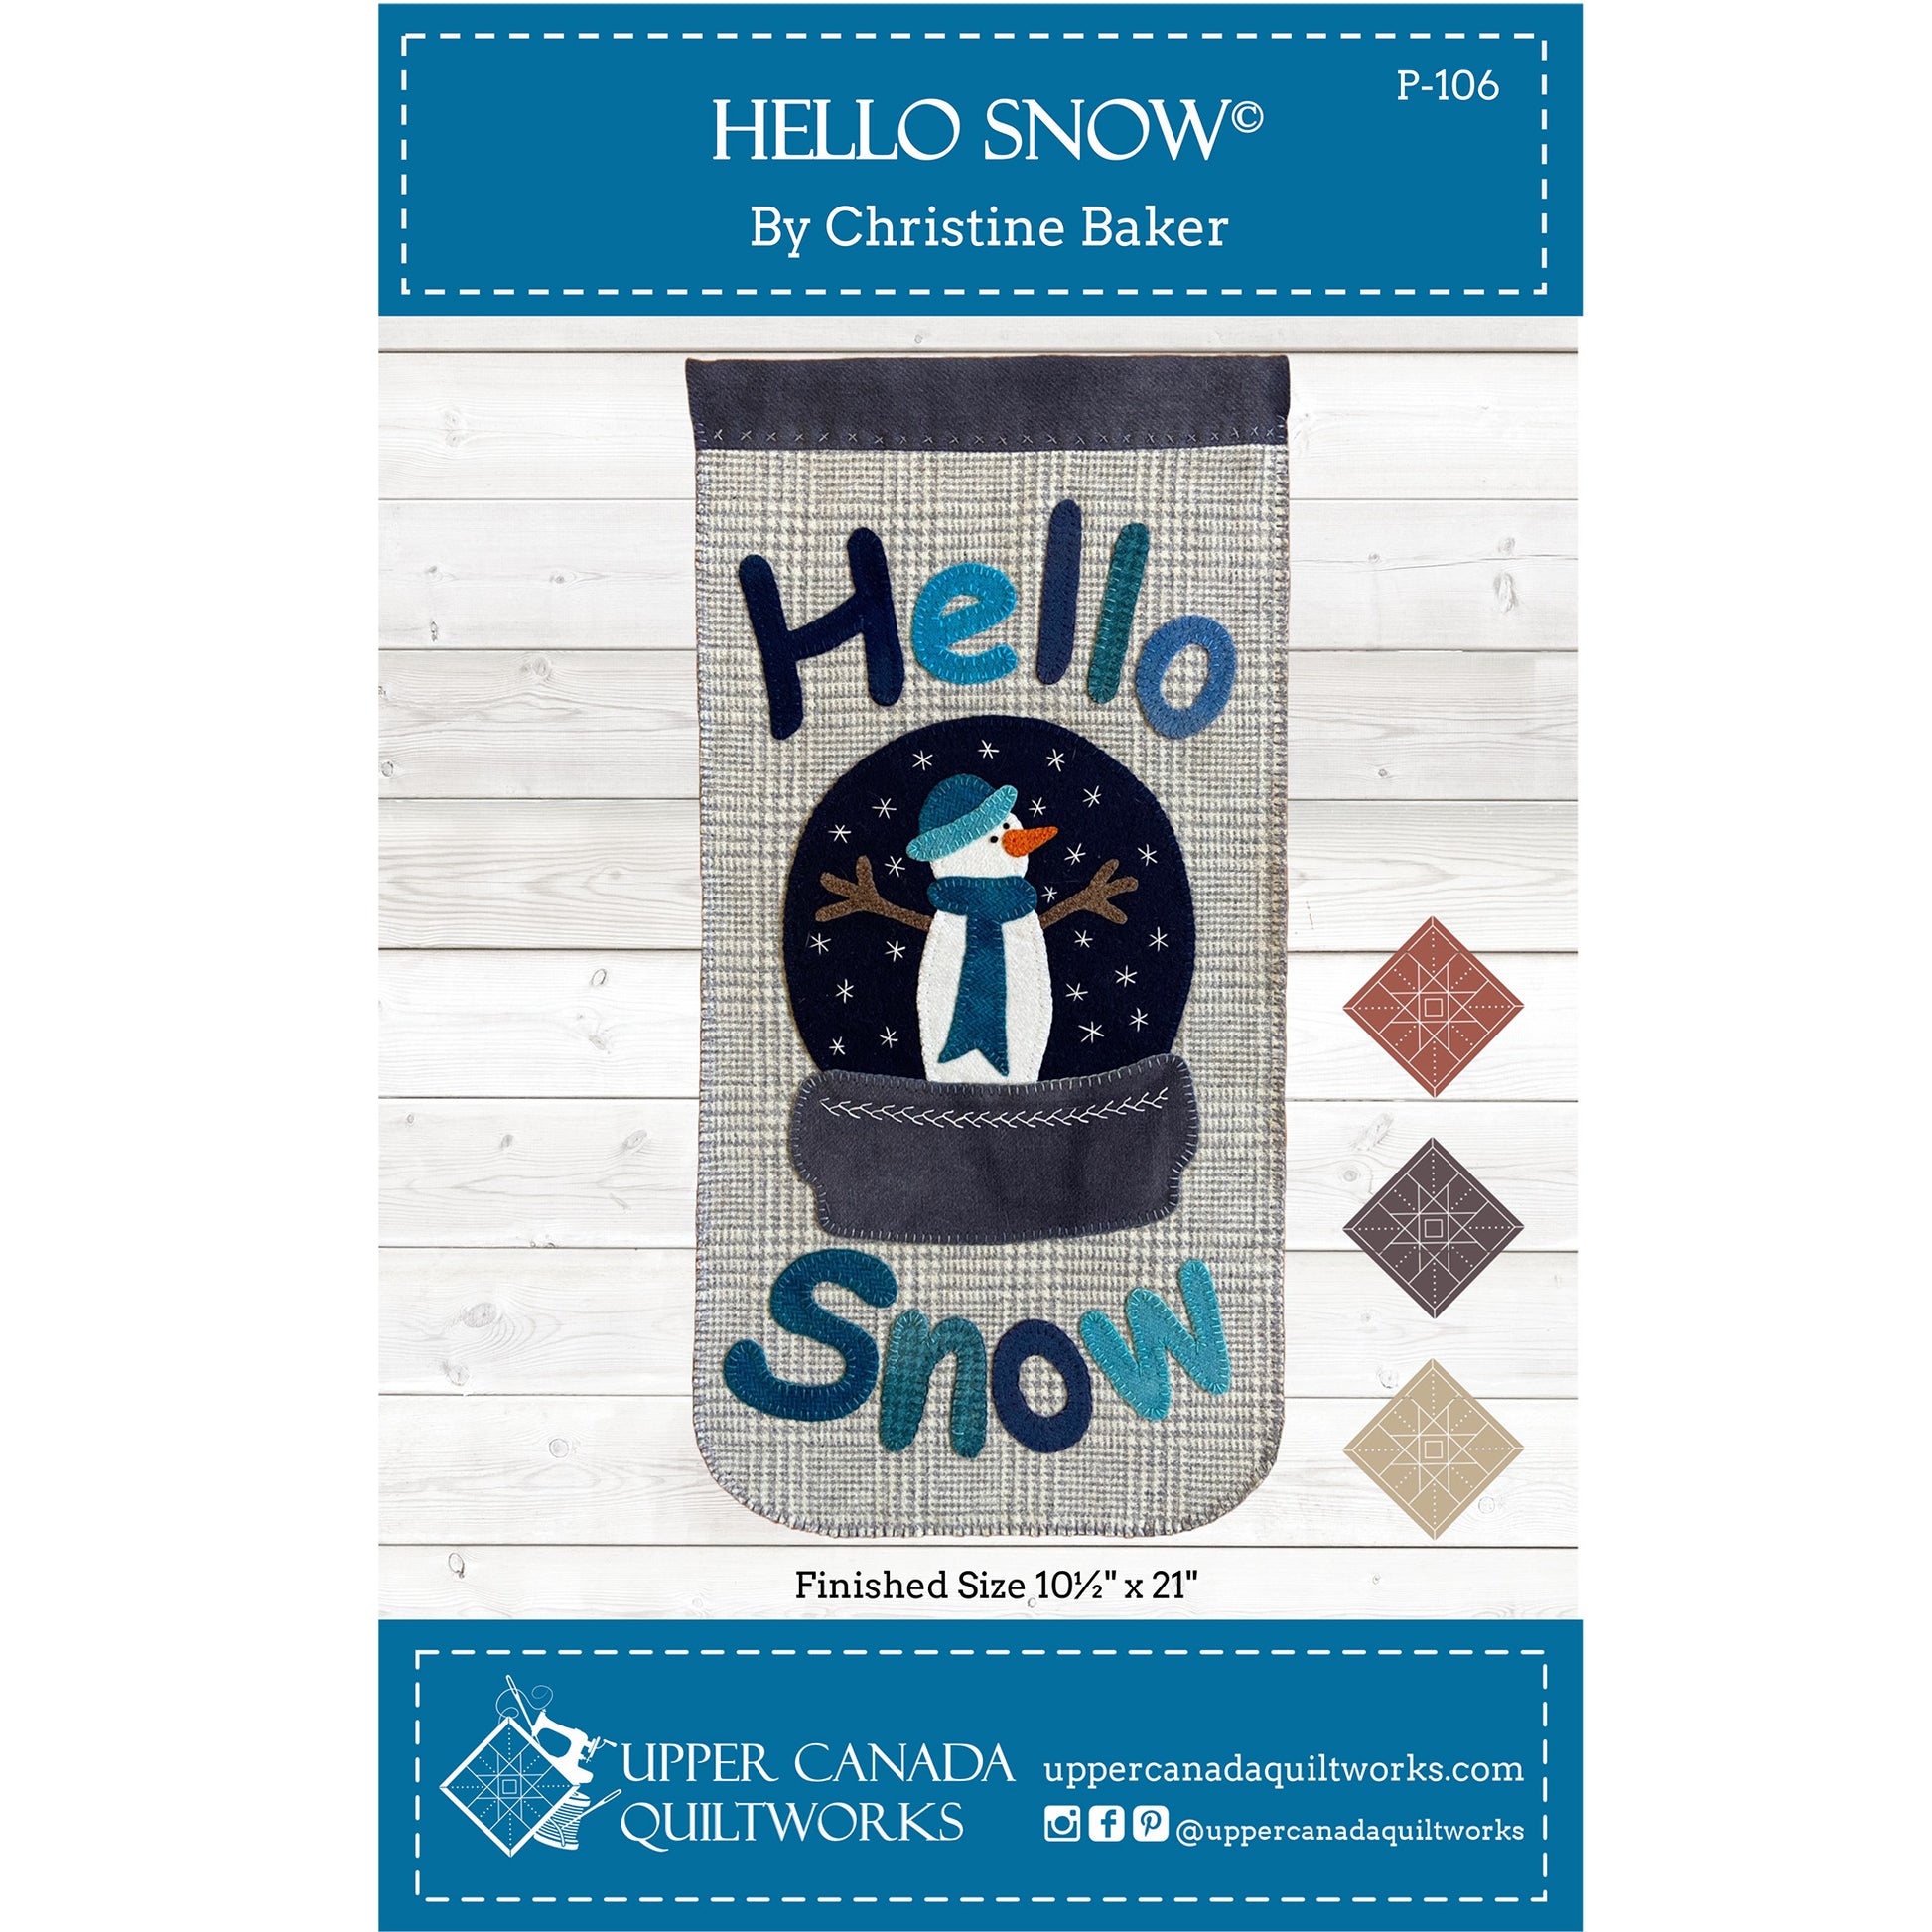 Cover image of pattern for Hello Snow Wall Hanging..